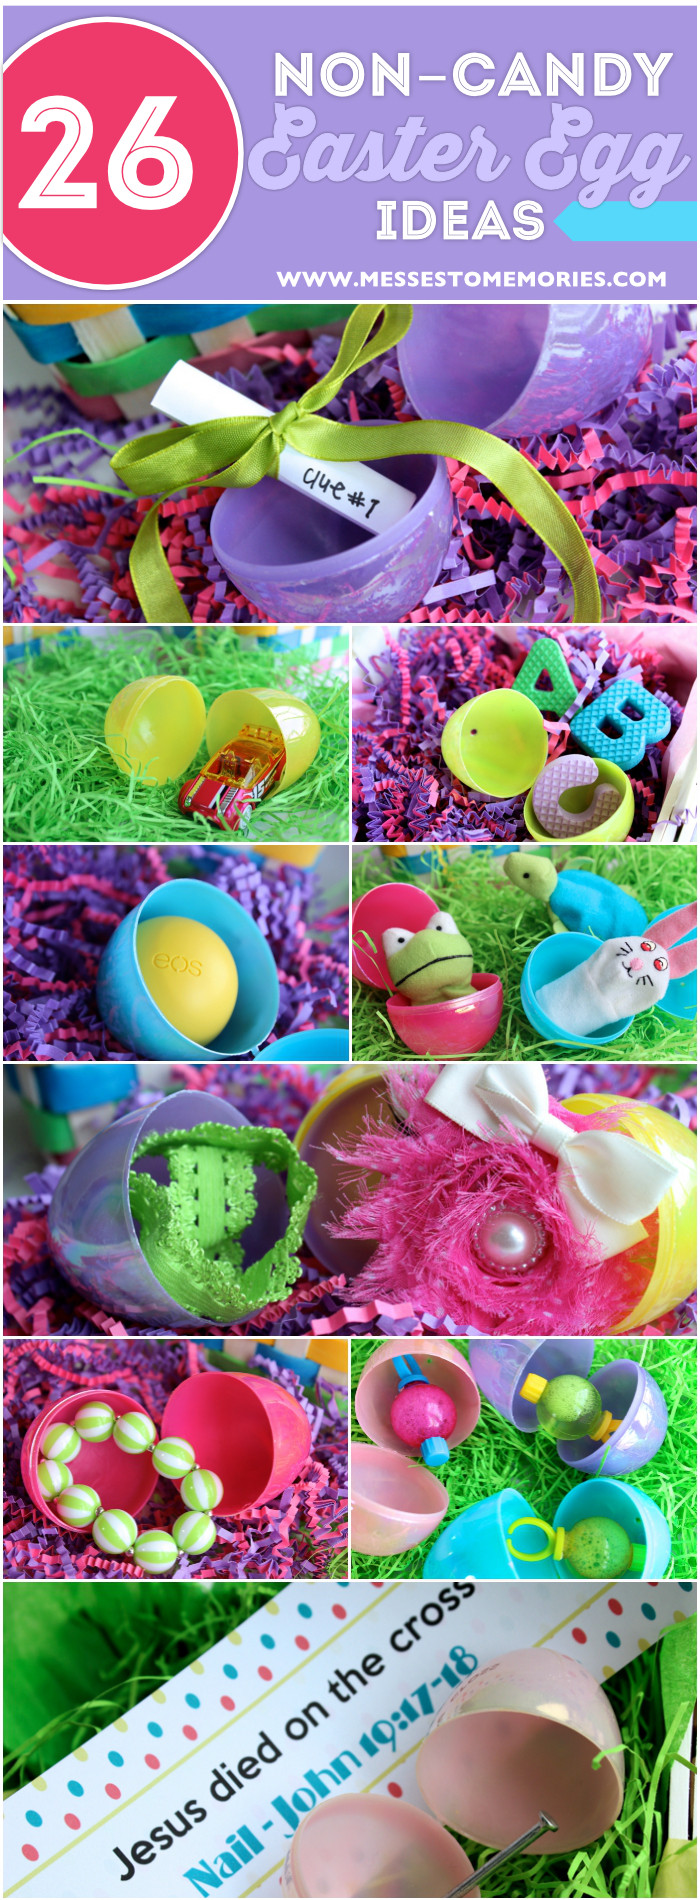 Ideas For Easter Egg Fillers
 25 THEMED EASTER BASKET IDEAS Messes to Memories